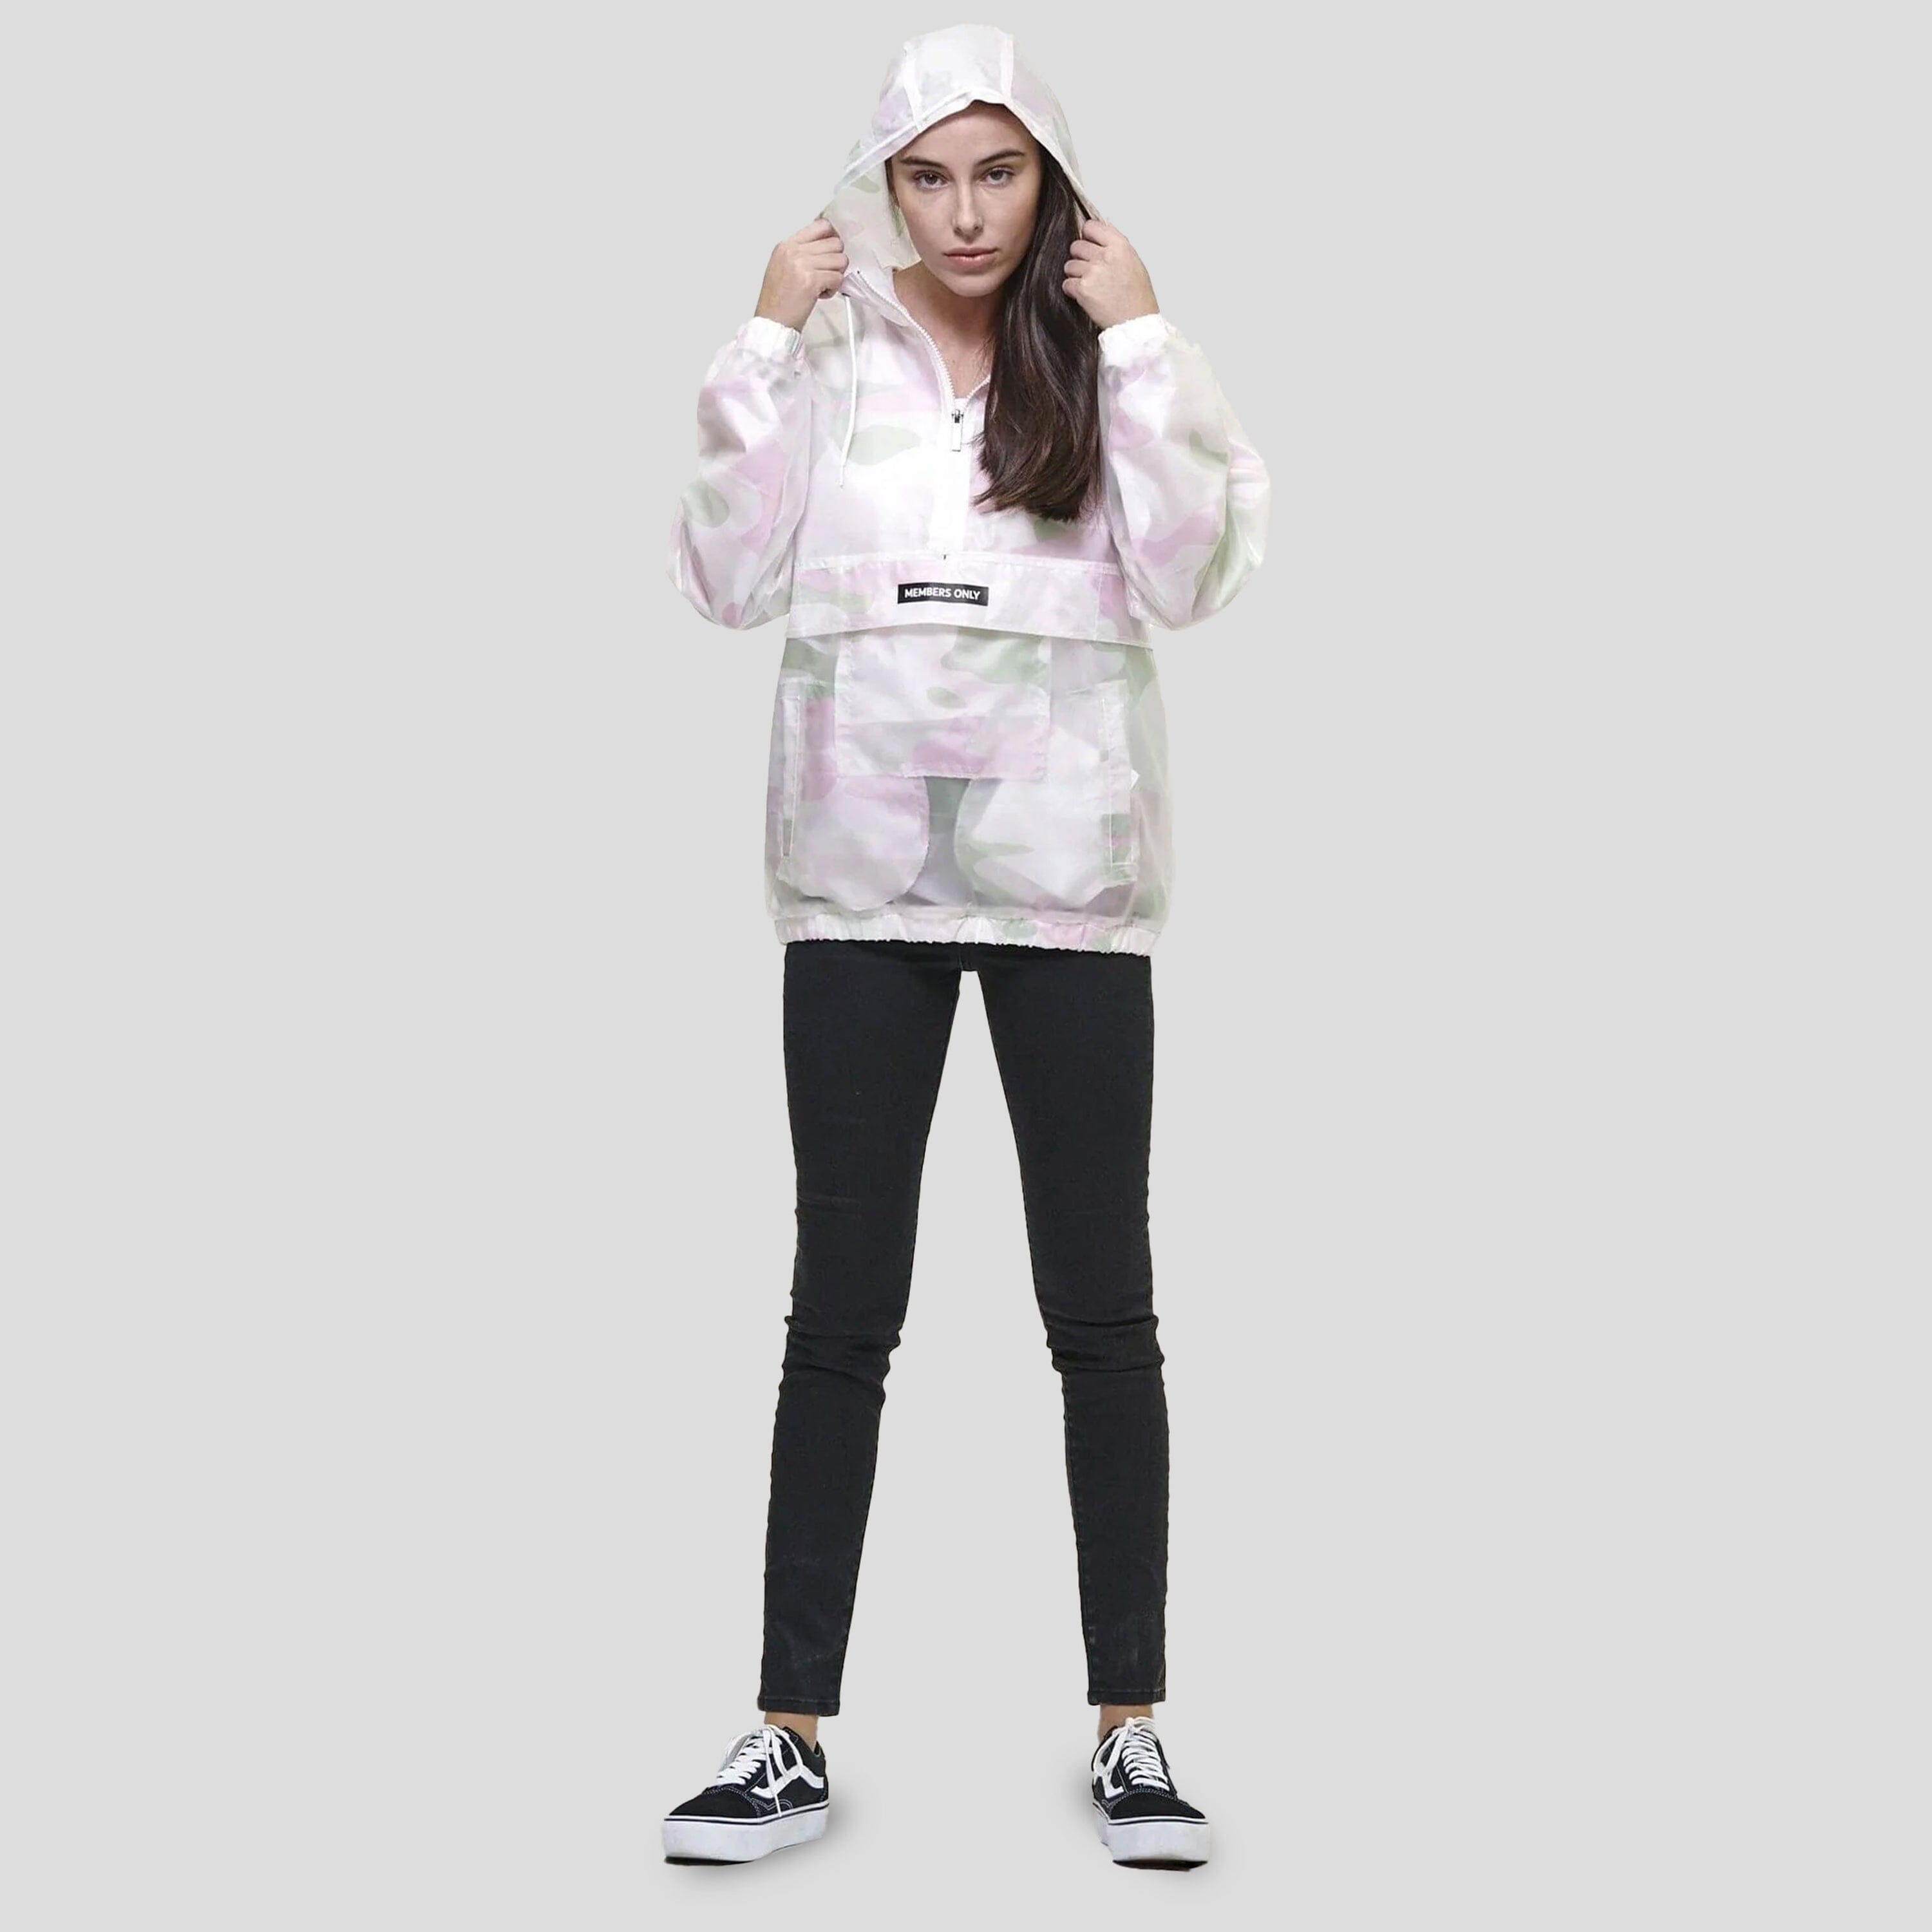 Women's Translucent Pullover Jacket with hood - FINAL SALE Womens Jacket Members Only 